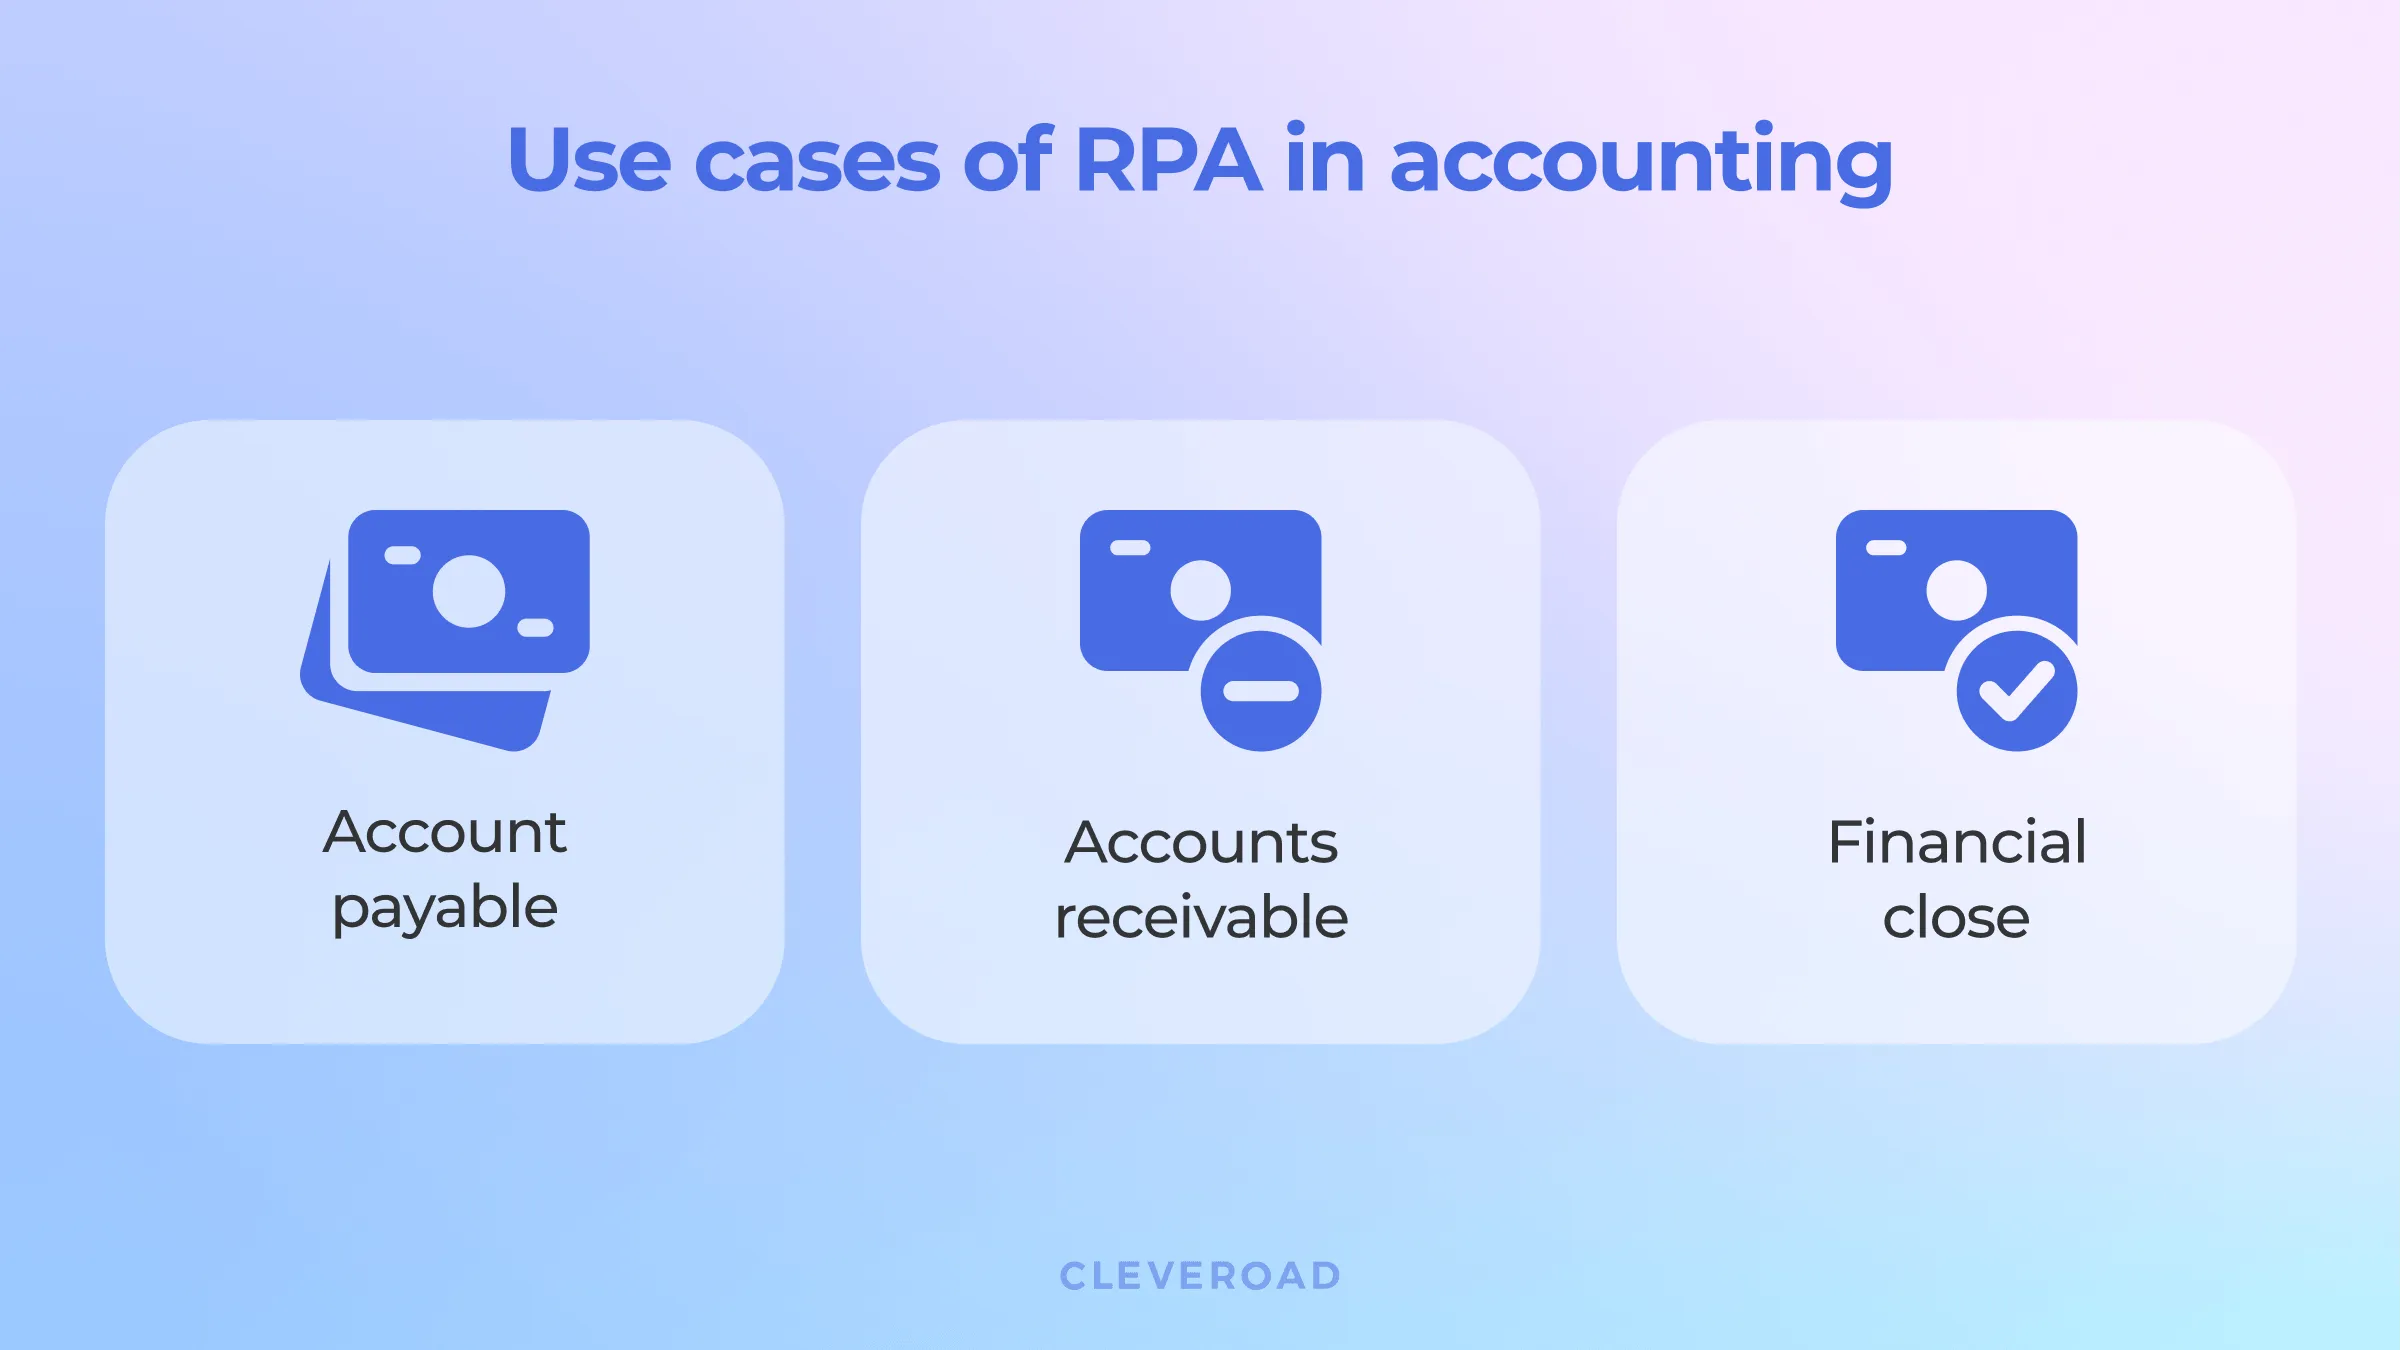 Use cases of RPA in accounting